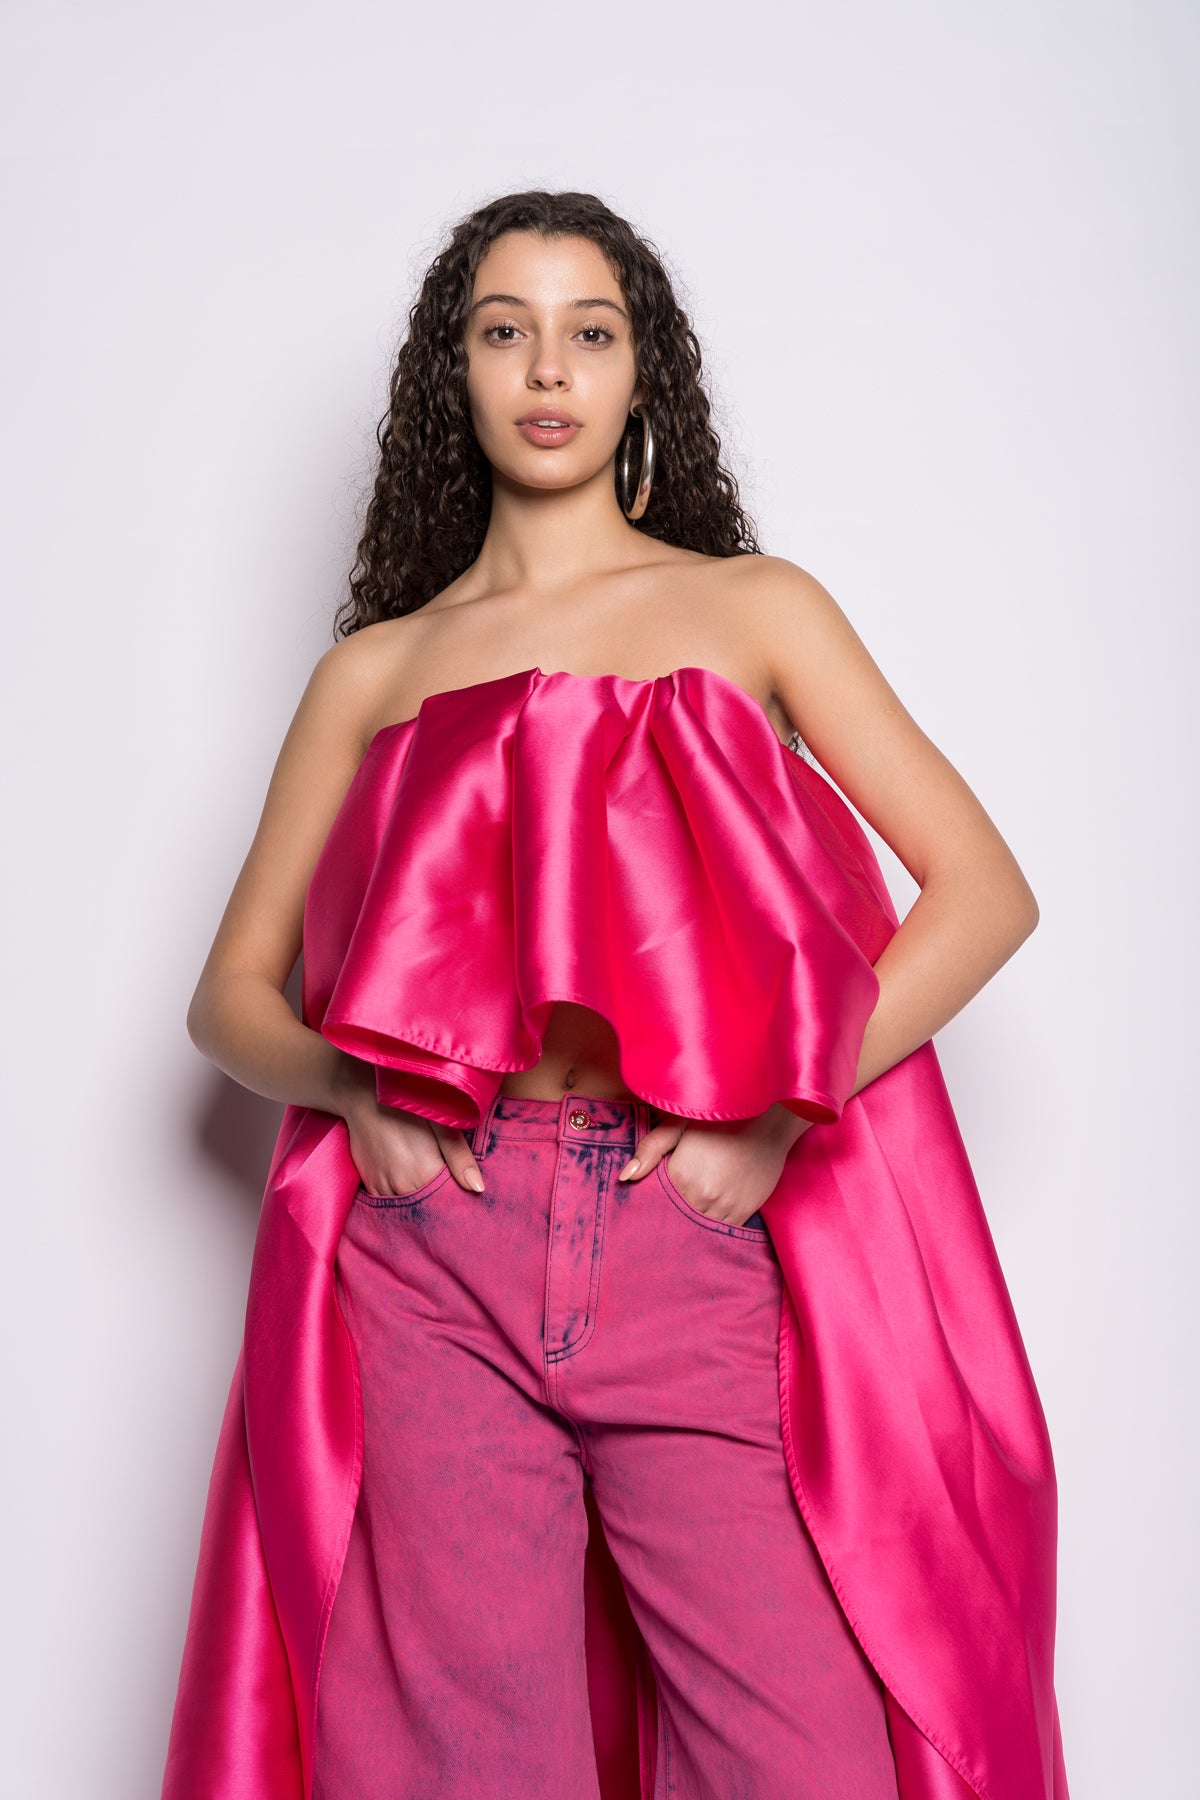 PINK PLEATED STRAPLESS TOP WITH LONG BACK marques almeida